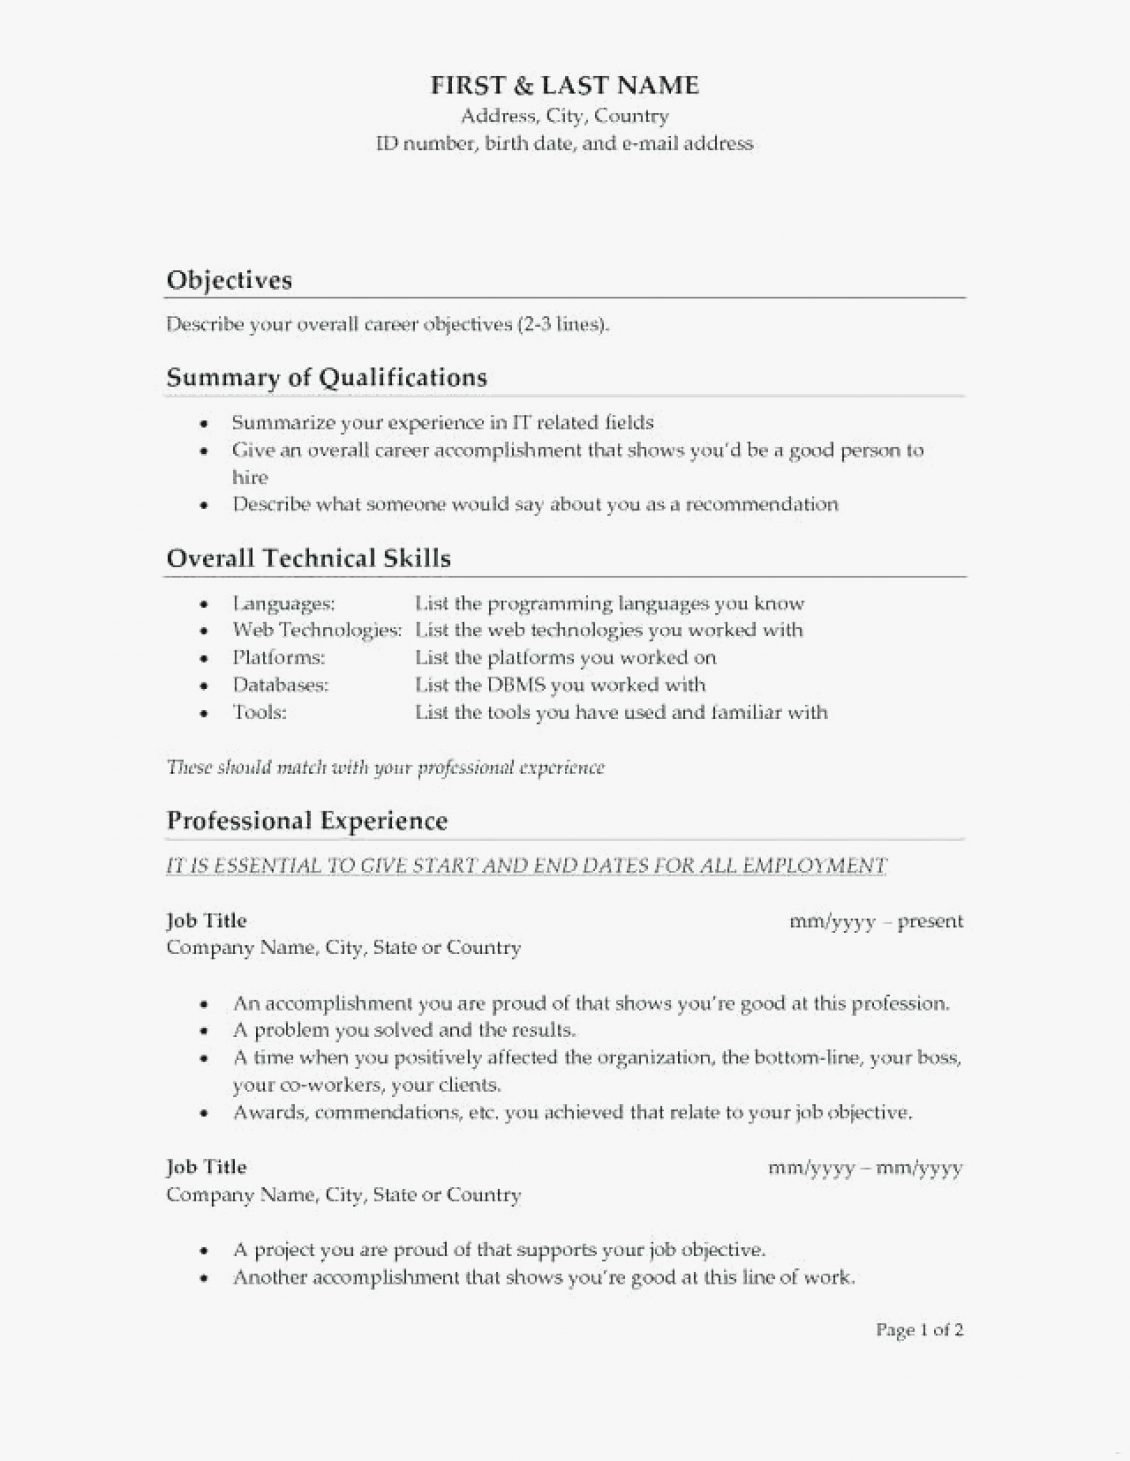 Good Objective For Resume Whats A Good Objective Put On Resume For Lovely General Objectives Resumes Accounting Samples Of Complete Consequently Statements 1130x1461 good objective for resume|wikiresume.com